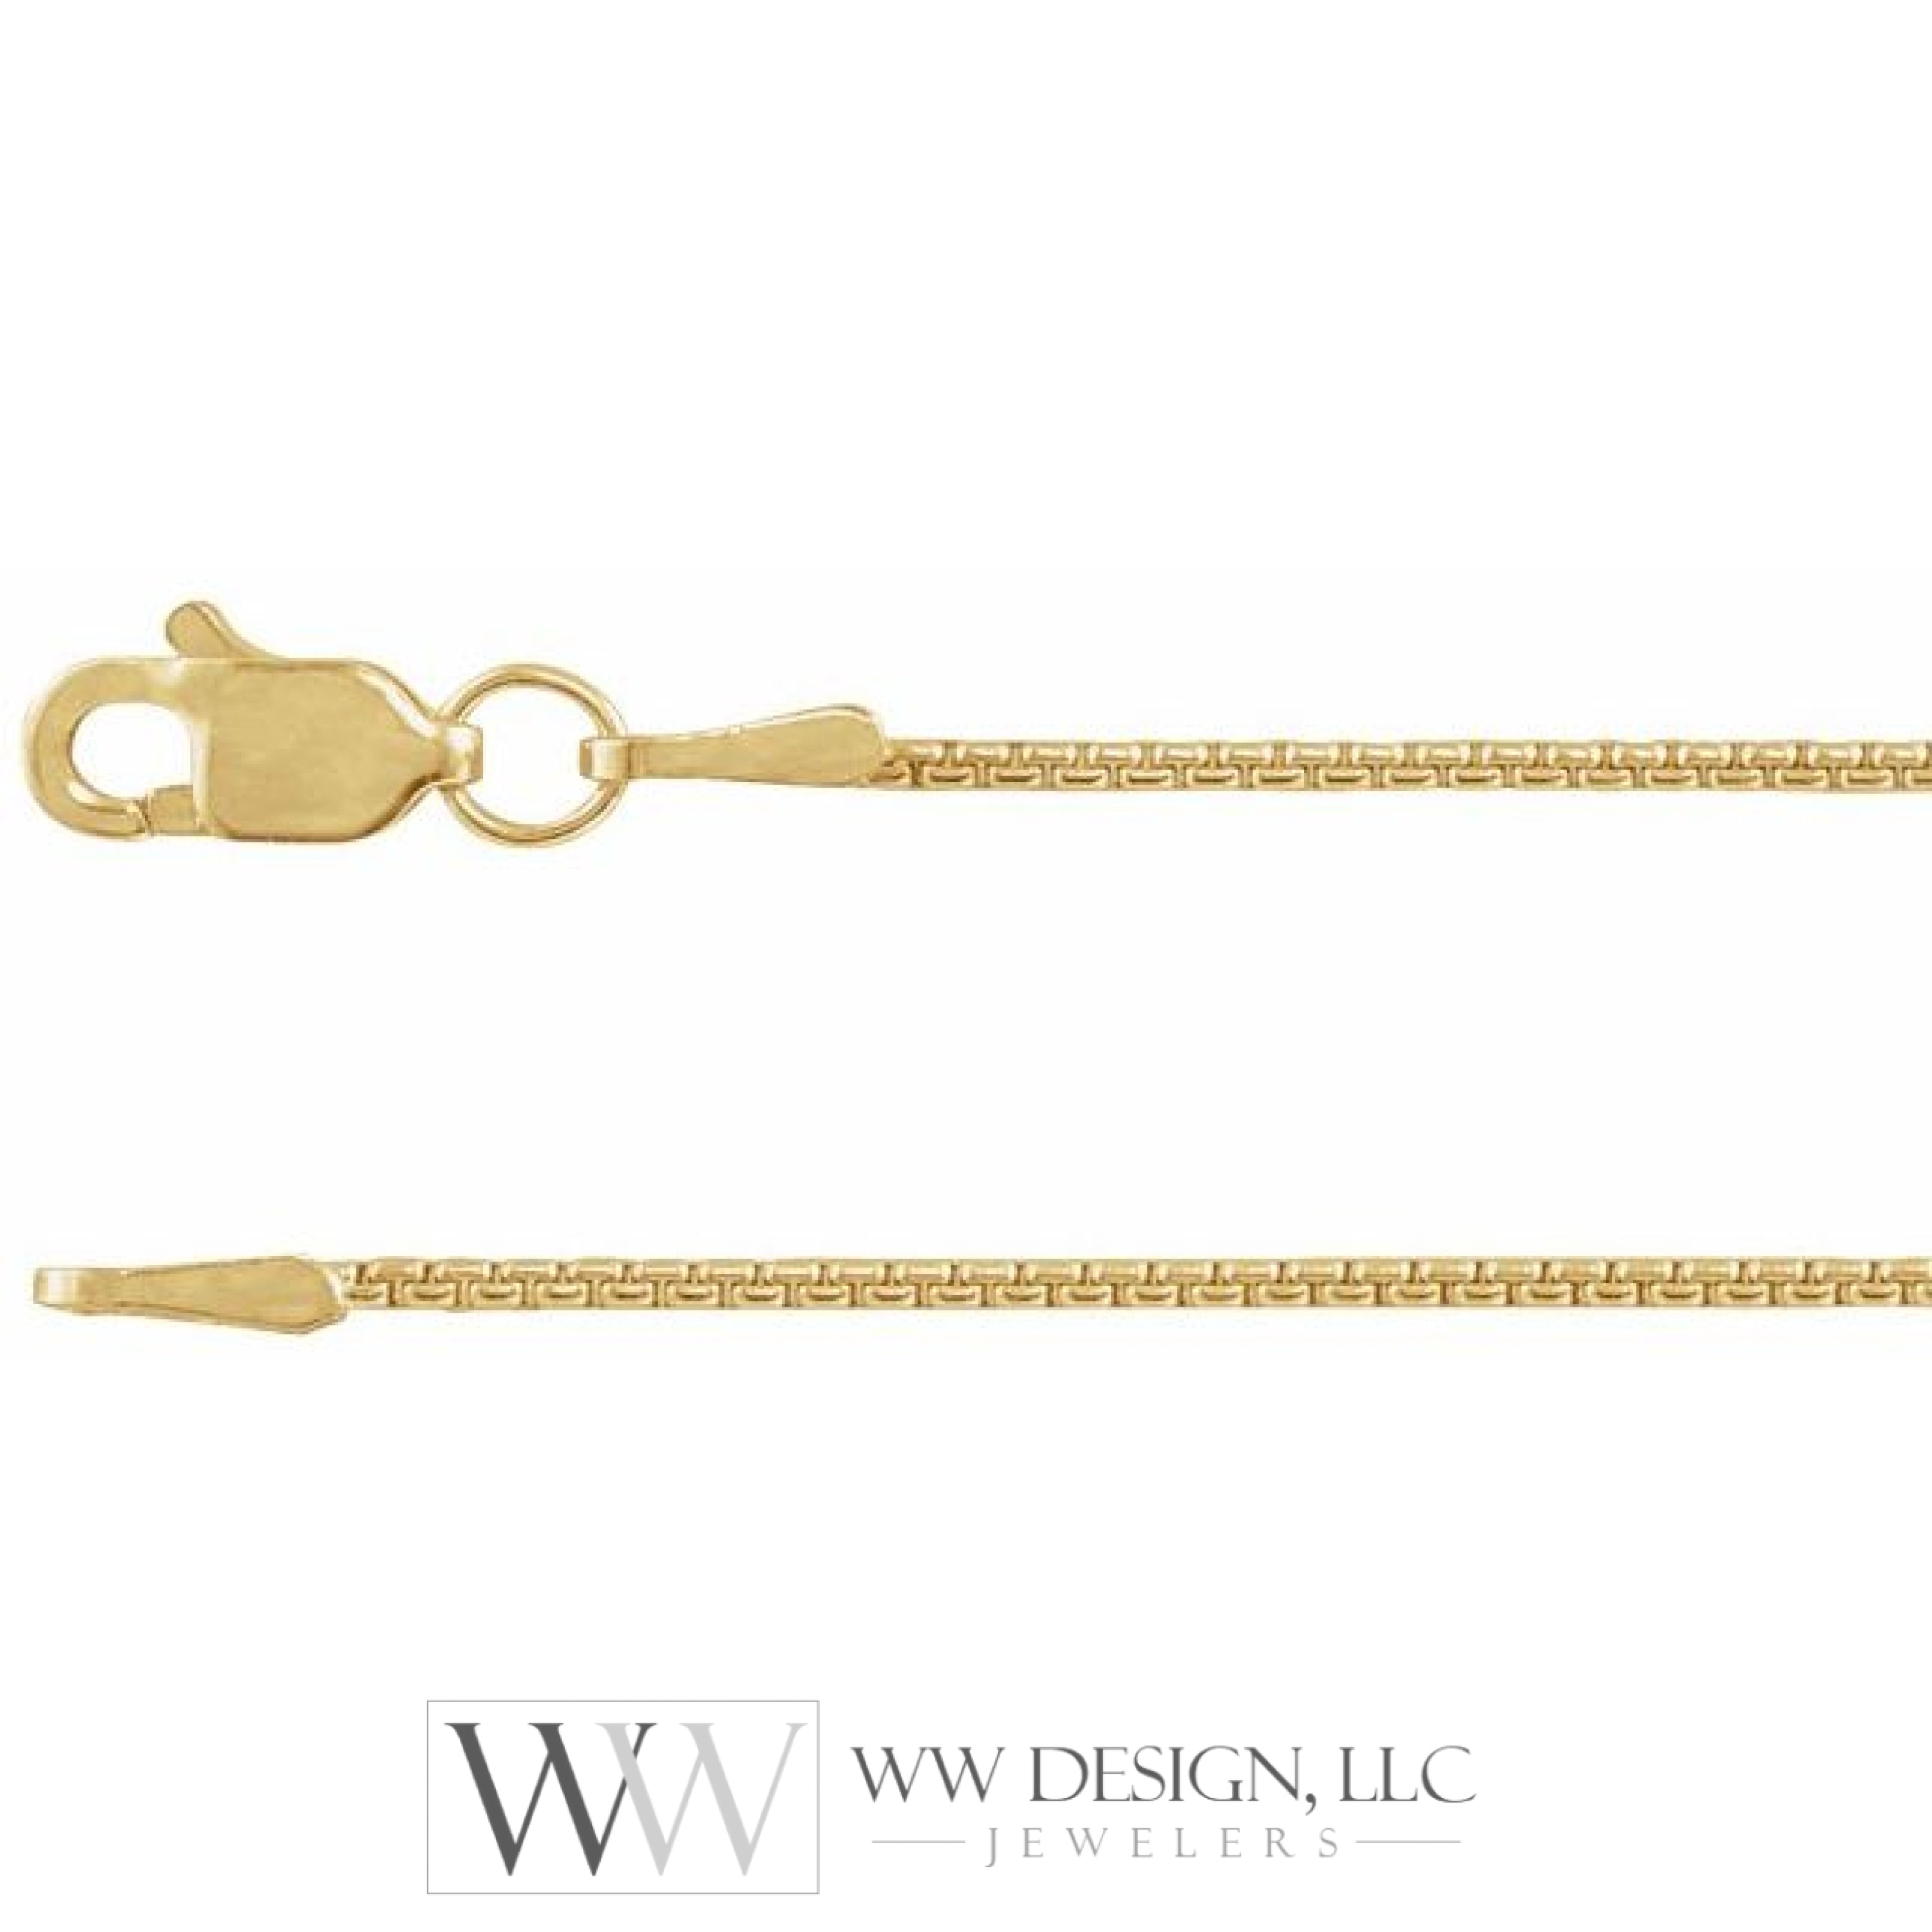 1mm Rounded Box Chain Bracelet or Necklace - 14k Gold (Y, R), or Sterling Silver